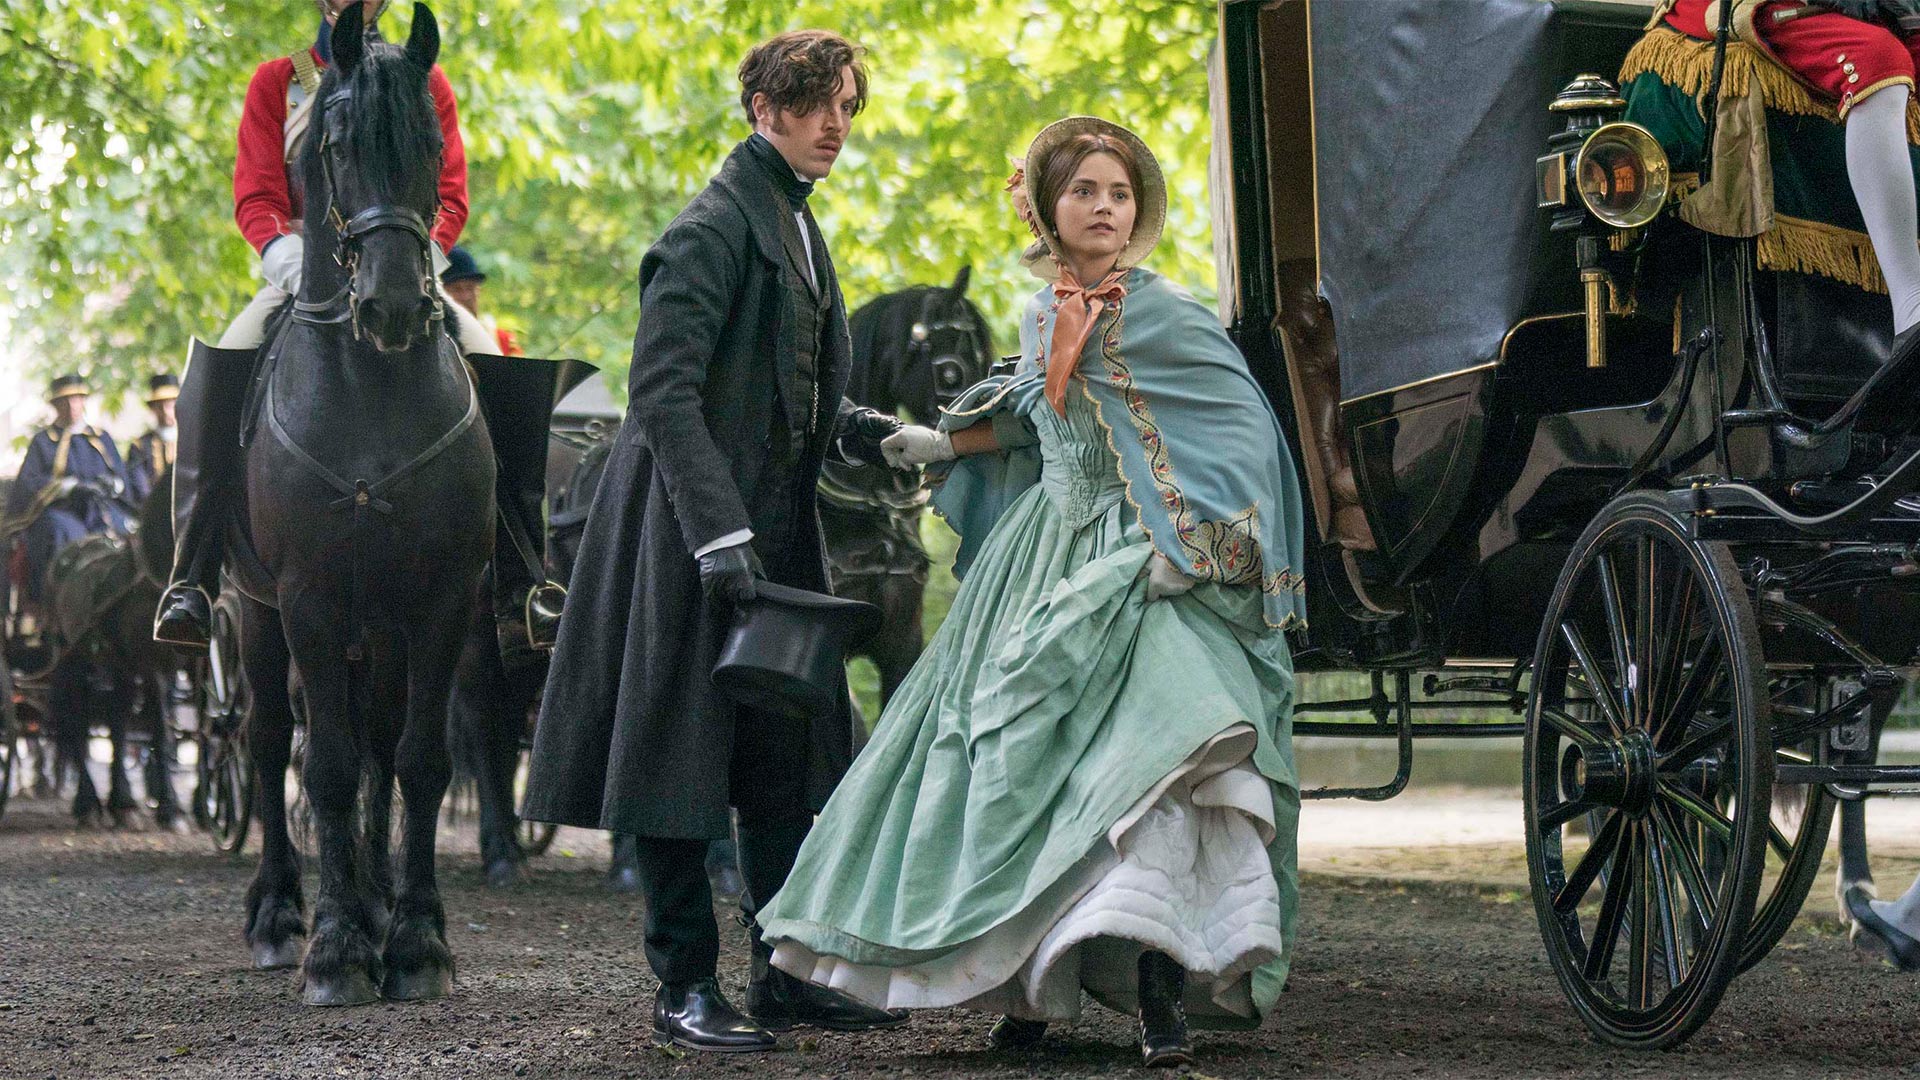 Prince Albert played by Tom Hughes and Queen Victoria played by Jenna Coleman